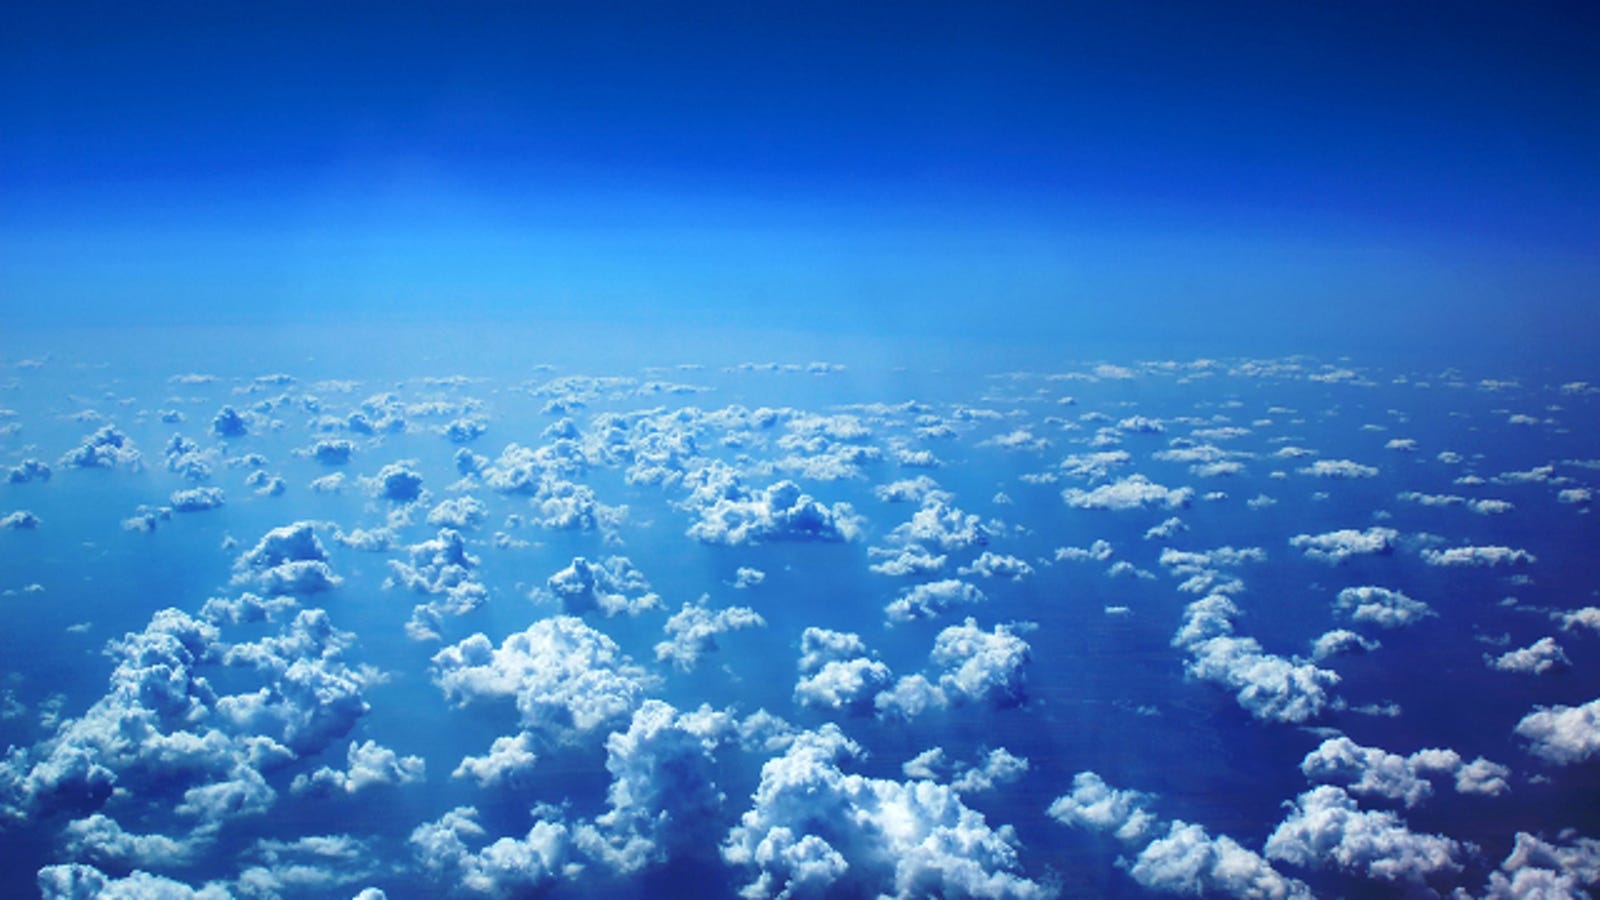 Bacteria and fungi living 30,000 feet above the Earth could be